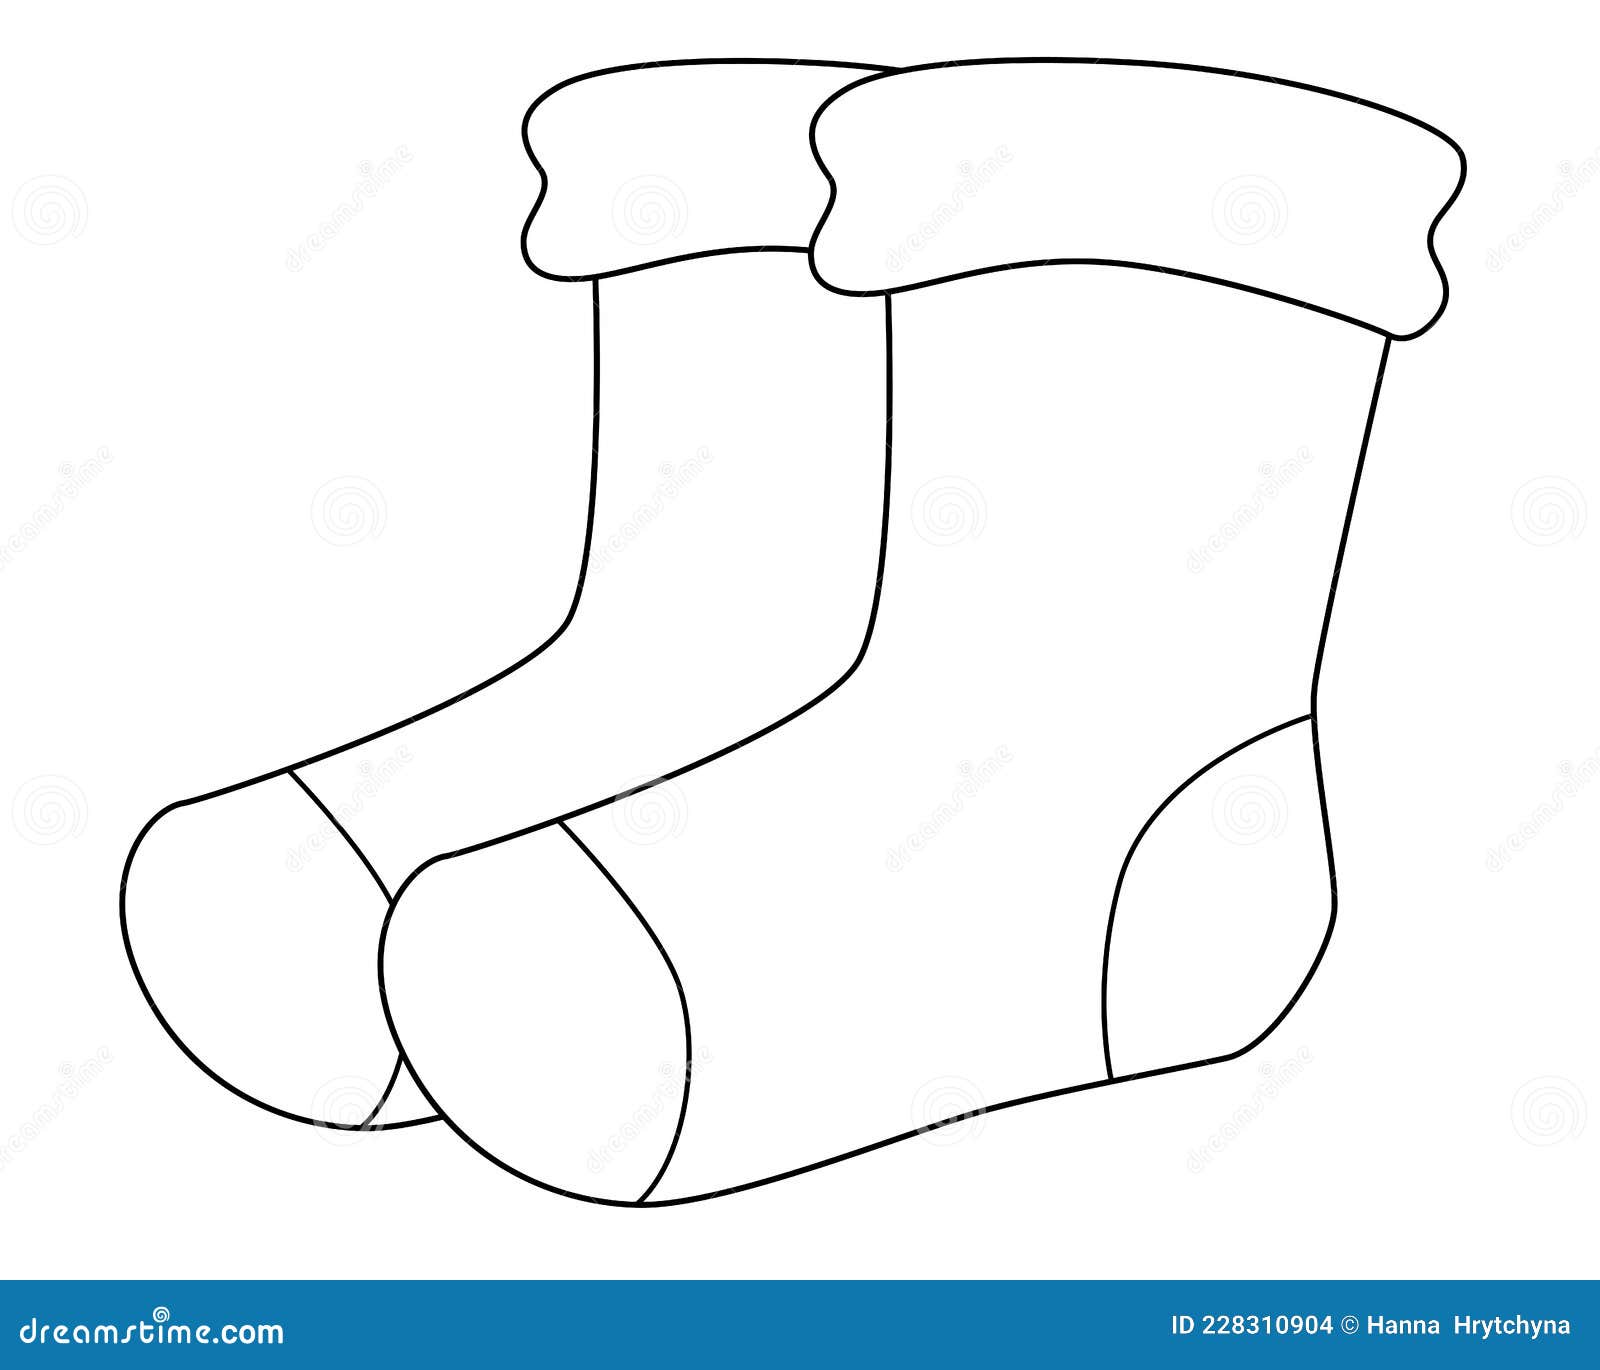 Socks. Pair of Socks - Vector Linear Illustration with Clothes for ...